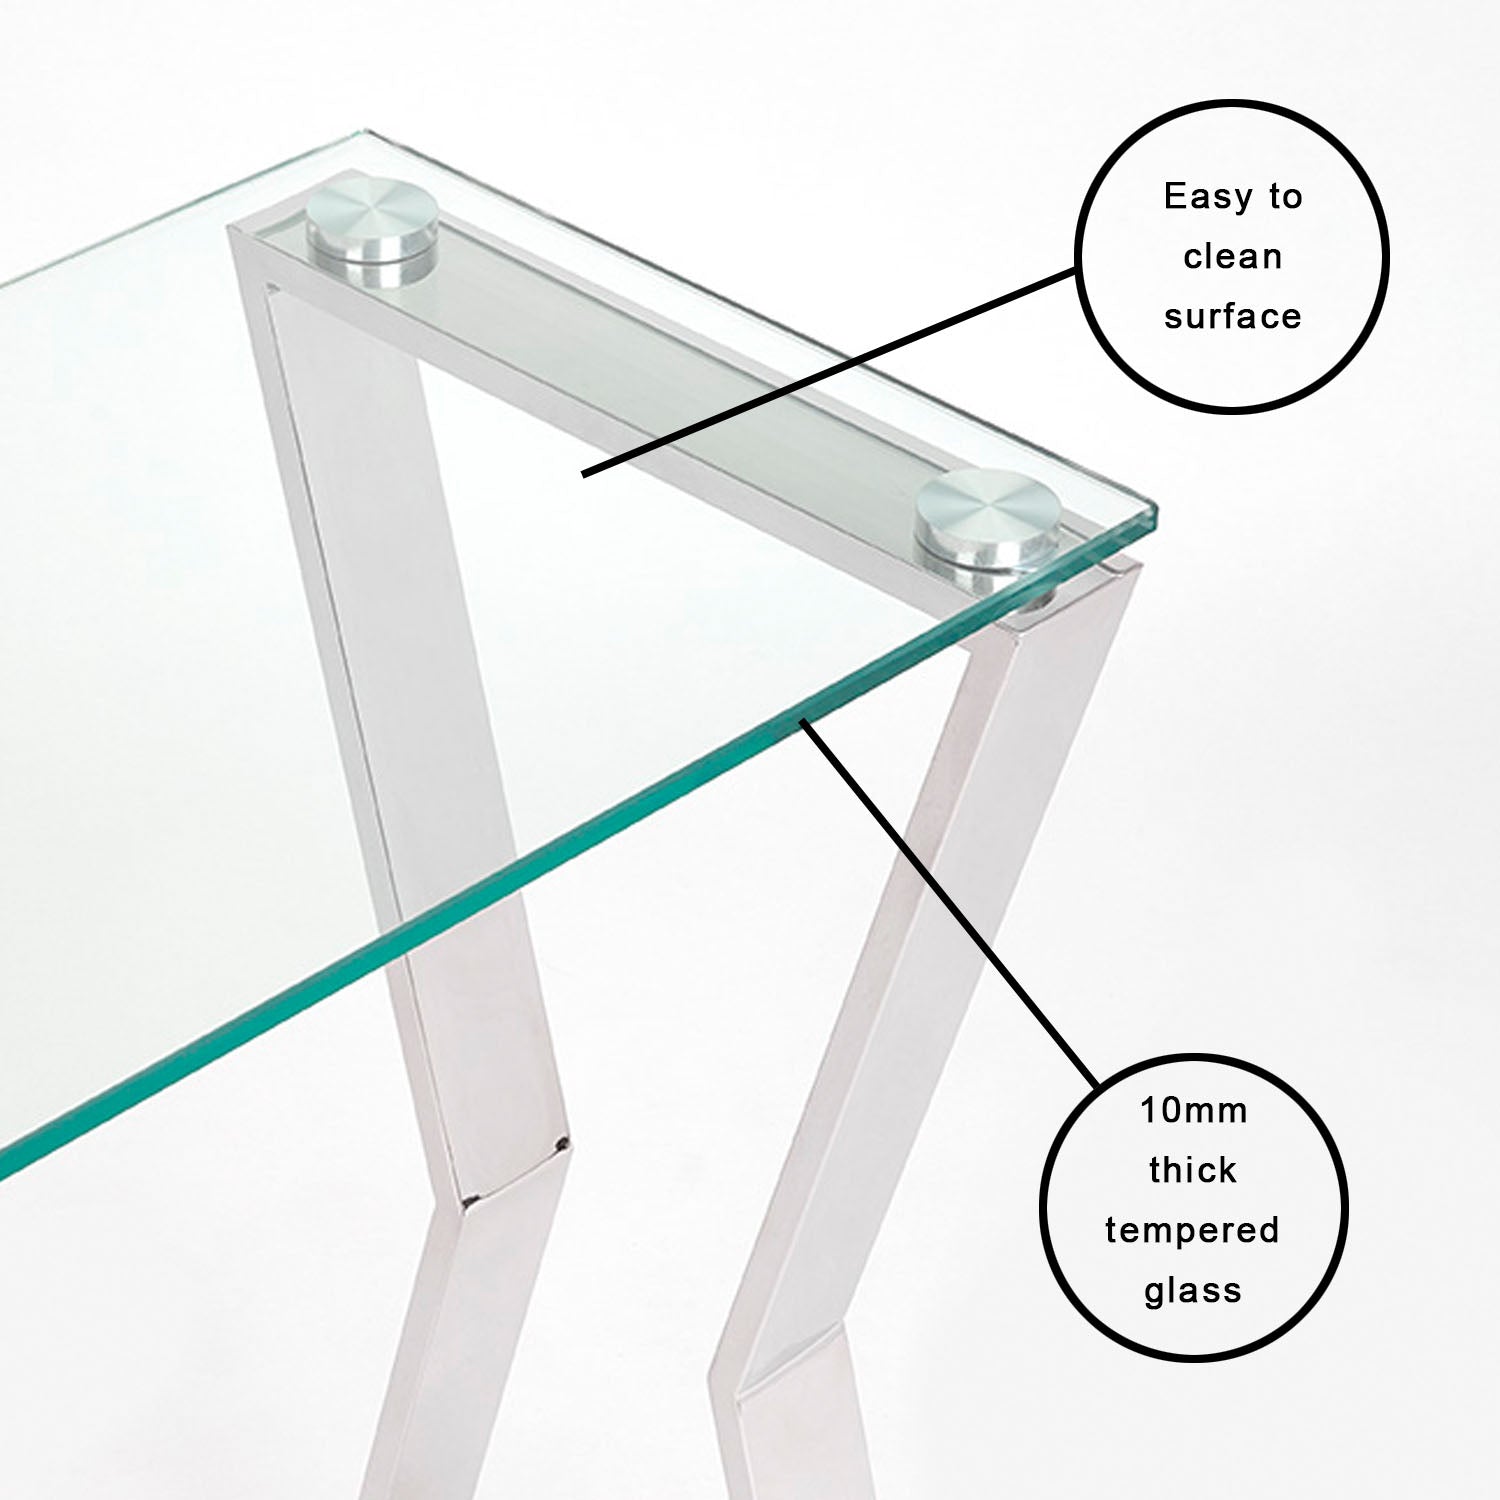 Tempered Glass Top, Stainless Steel Base for Modern elegance and enduring quality.